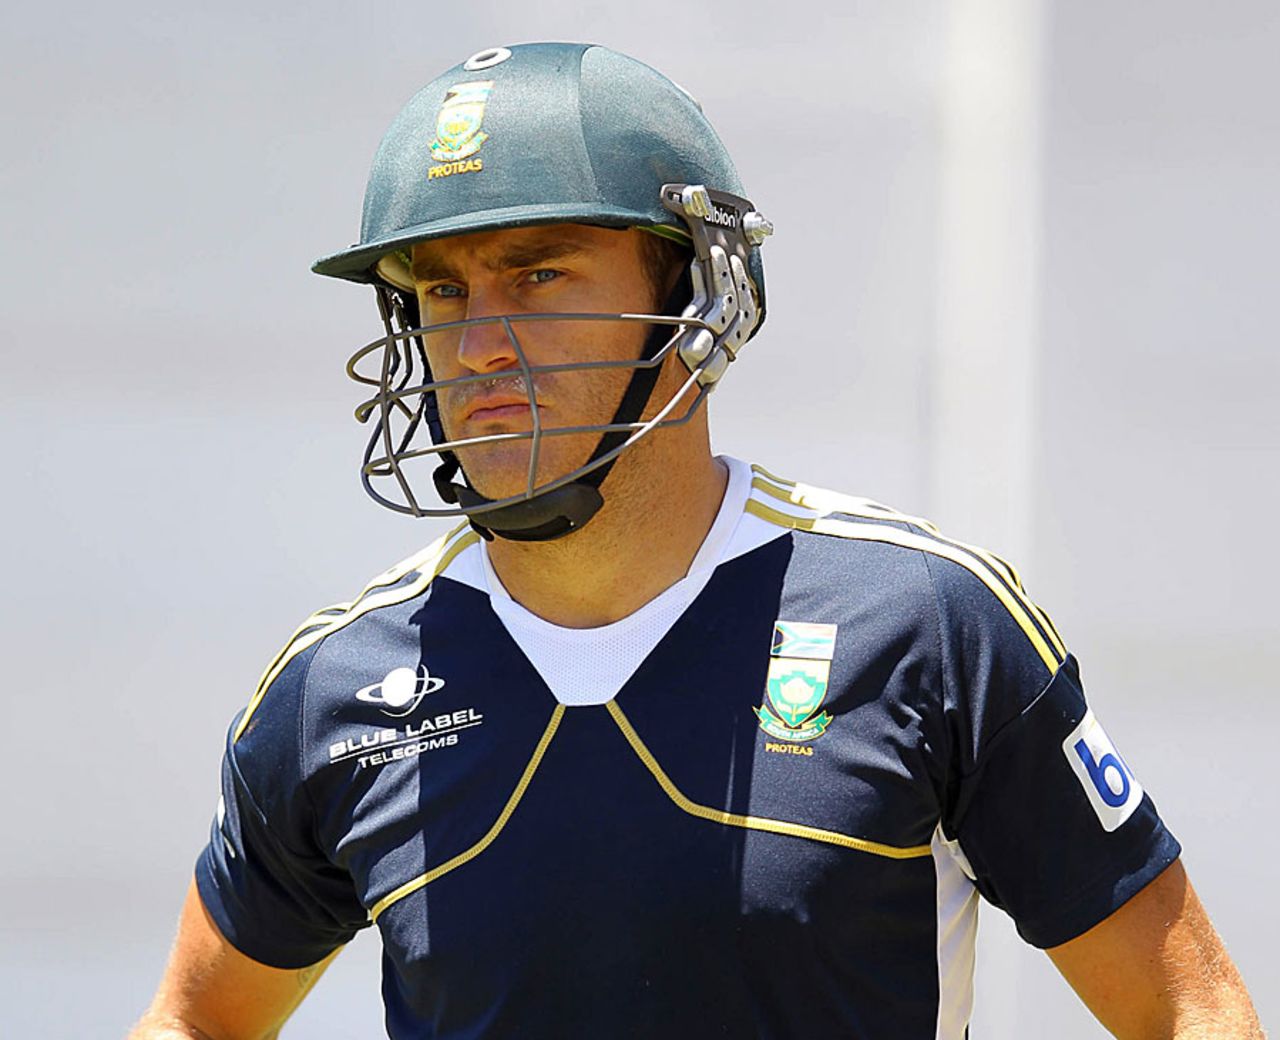 Faf du Plessis takes part in a nets session, Durban, December 19, 2012